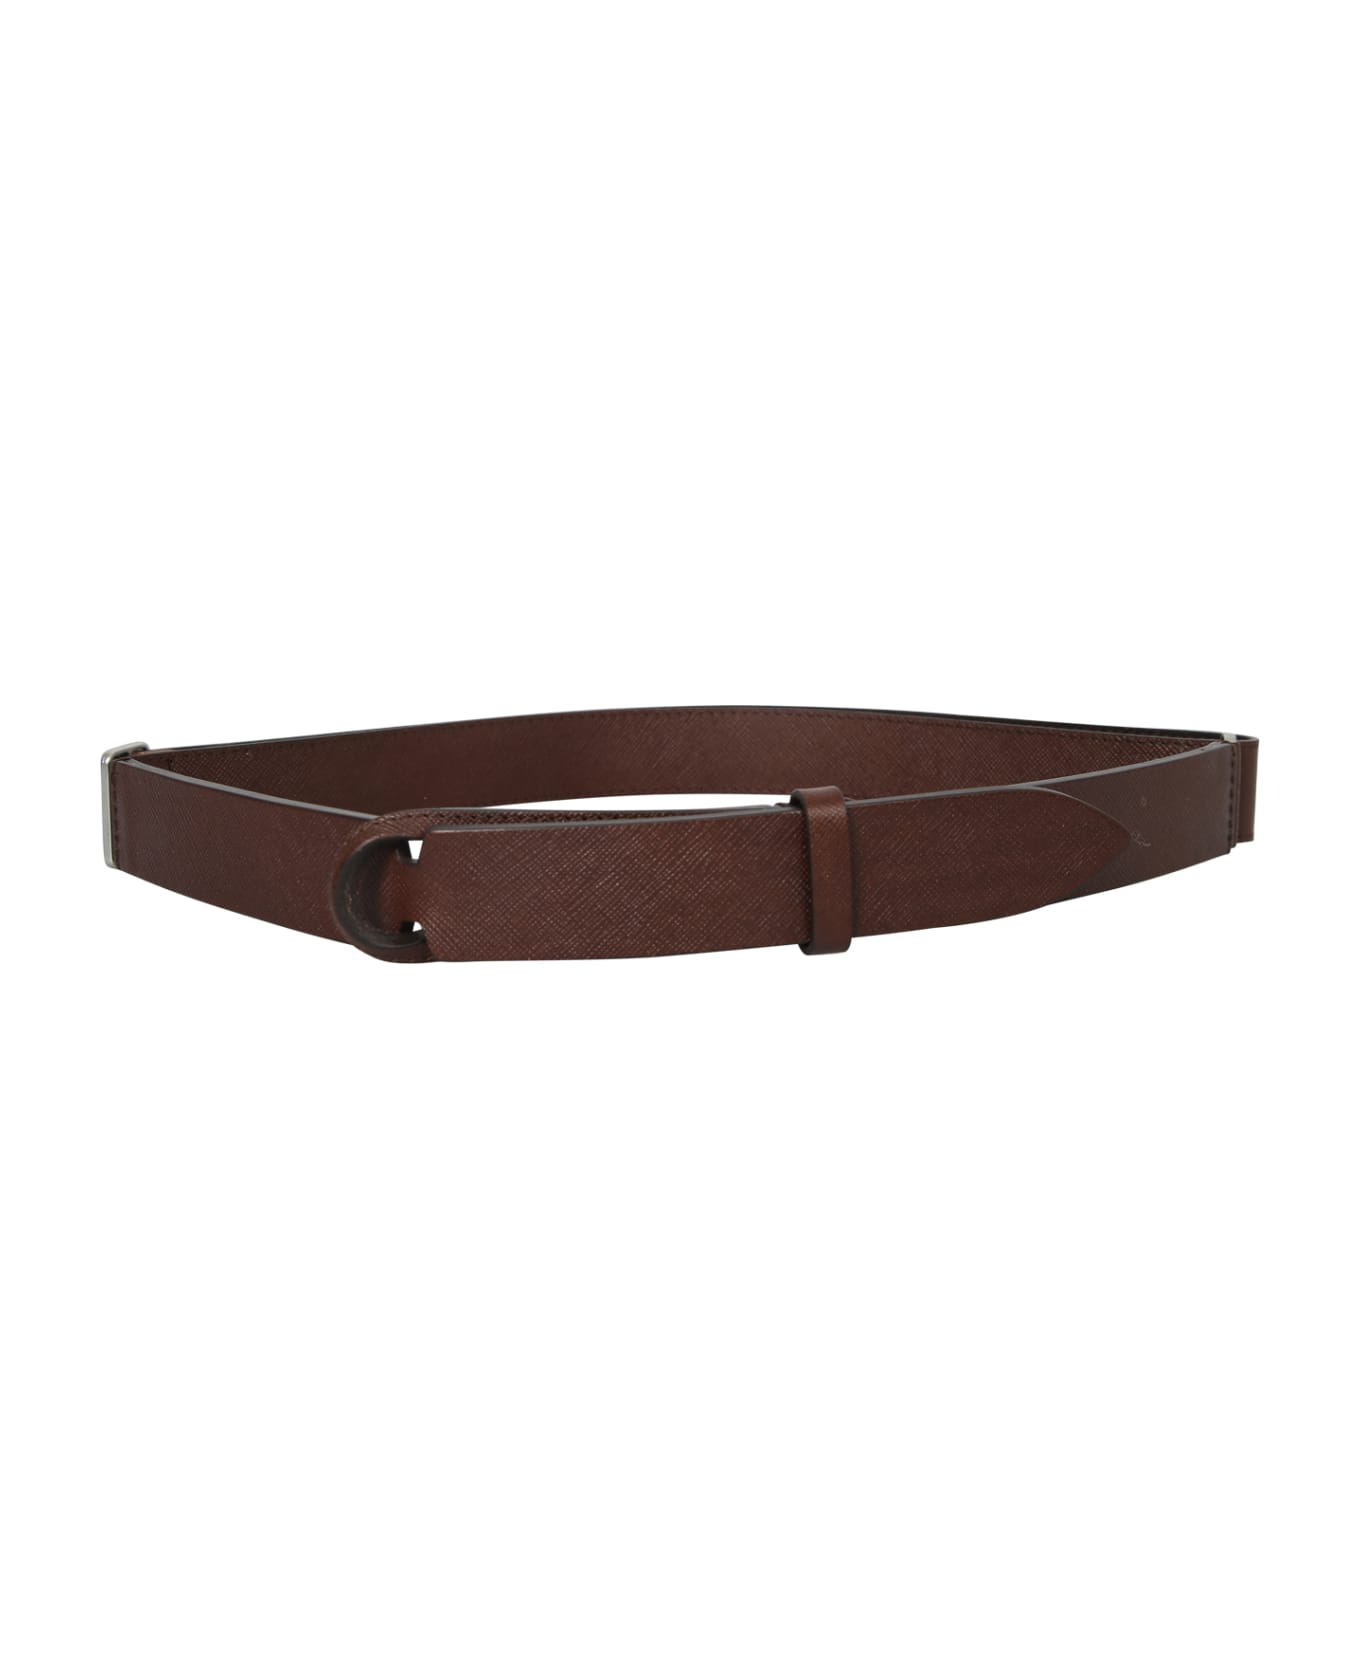 Orciani No Buckle Belt - Brown ベルト